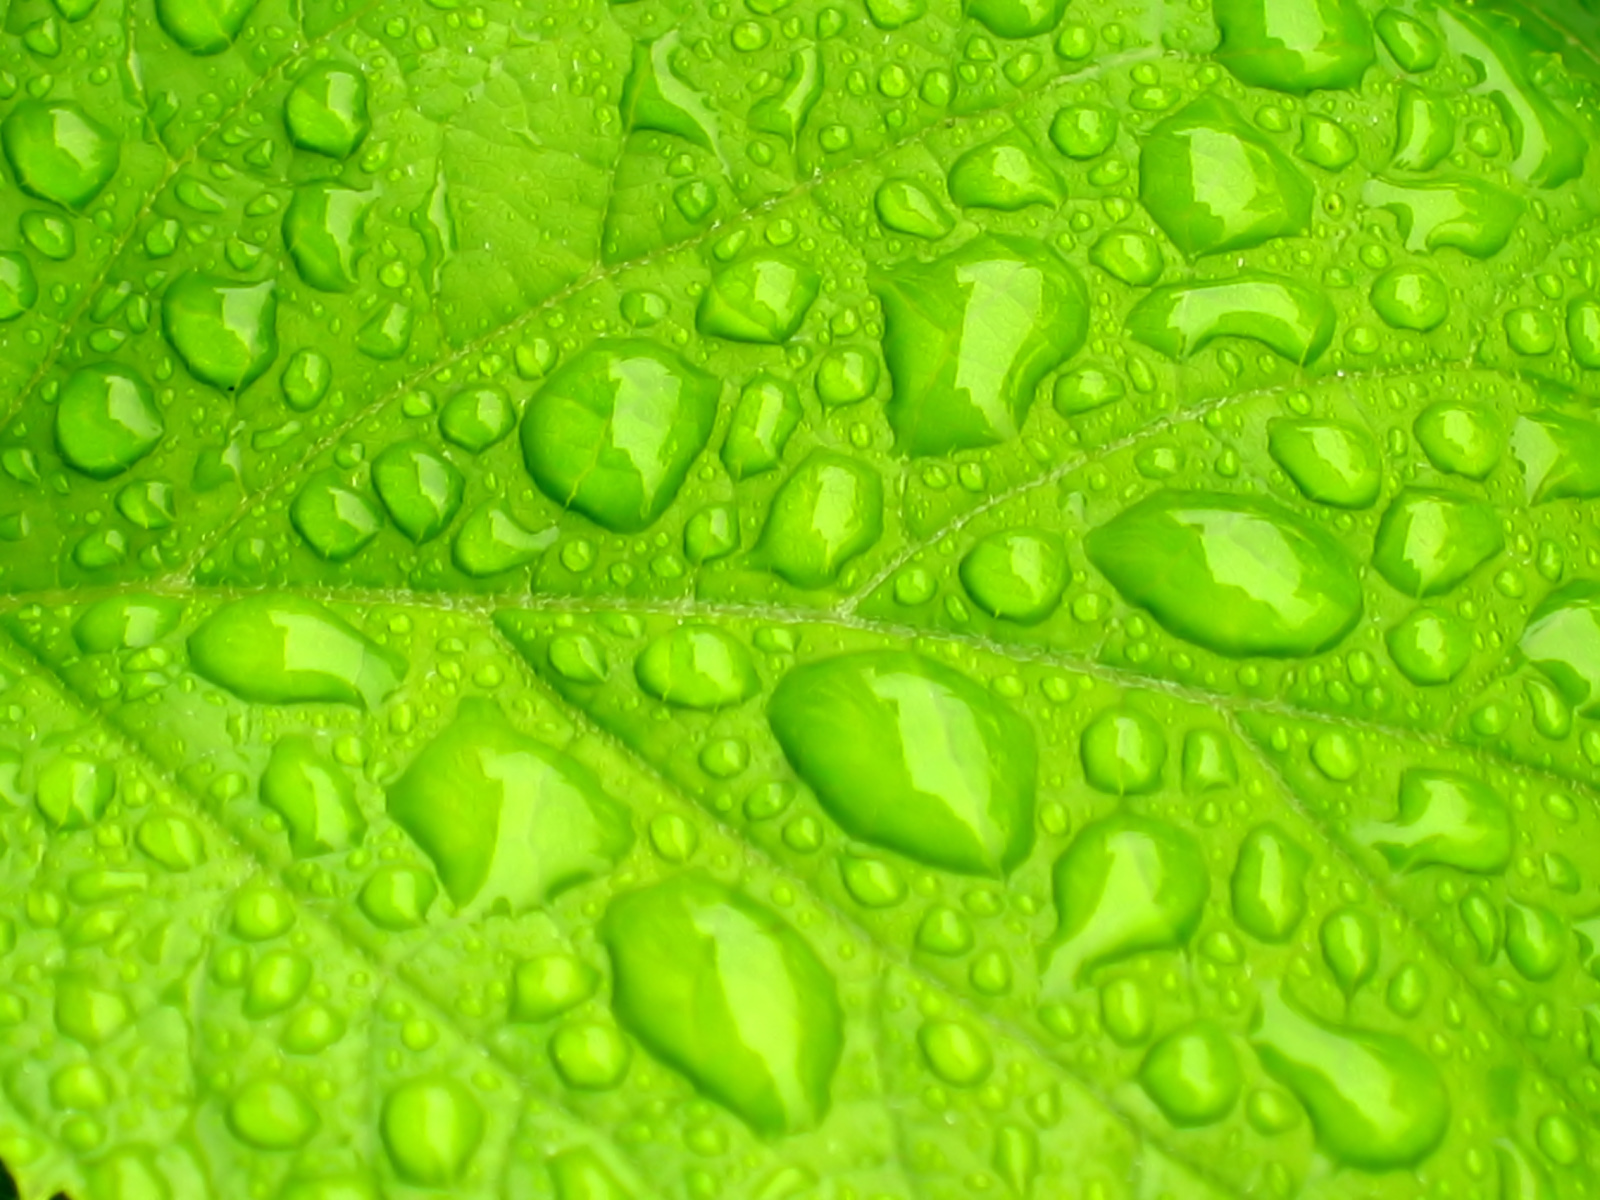 [Raindrops+on+leafs+Set+4+High+Definition+Wallpapers+2.jpg]